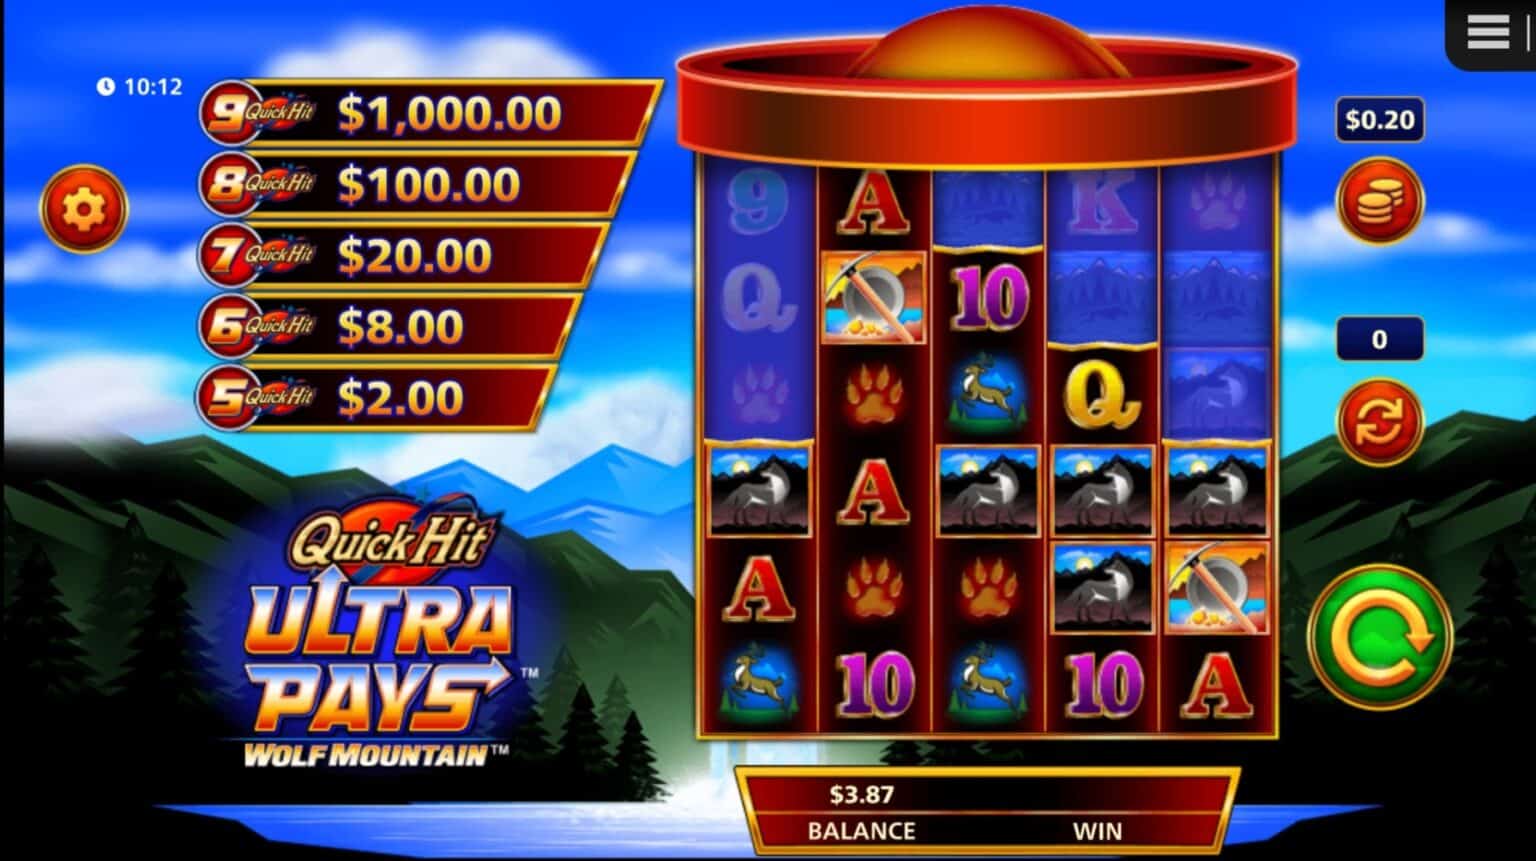 Quick Hit Ultra Pays Wolf Mountain At Borgata Brings The … Calm?